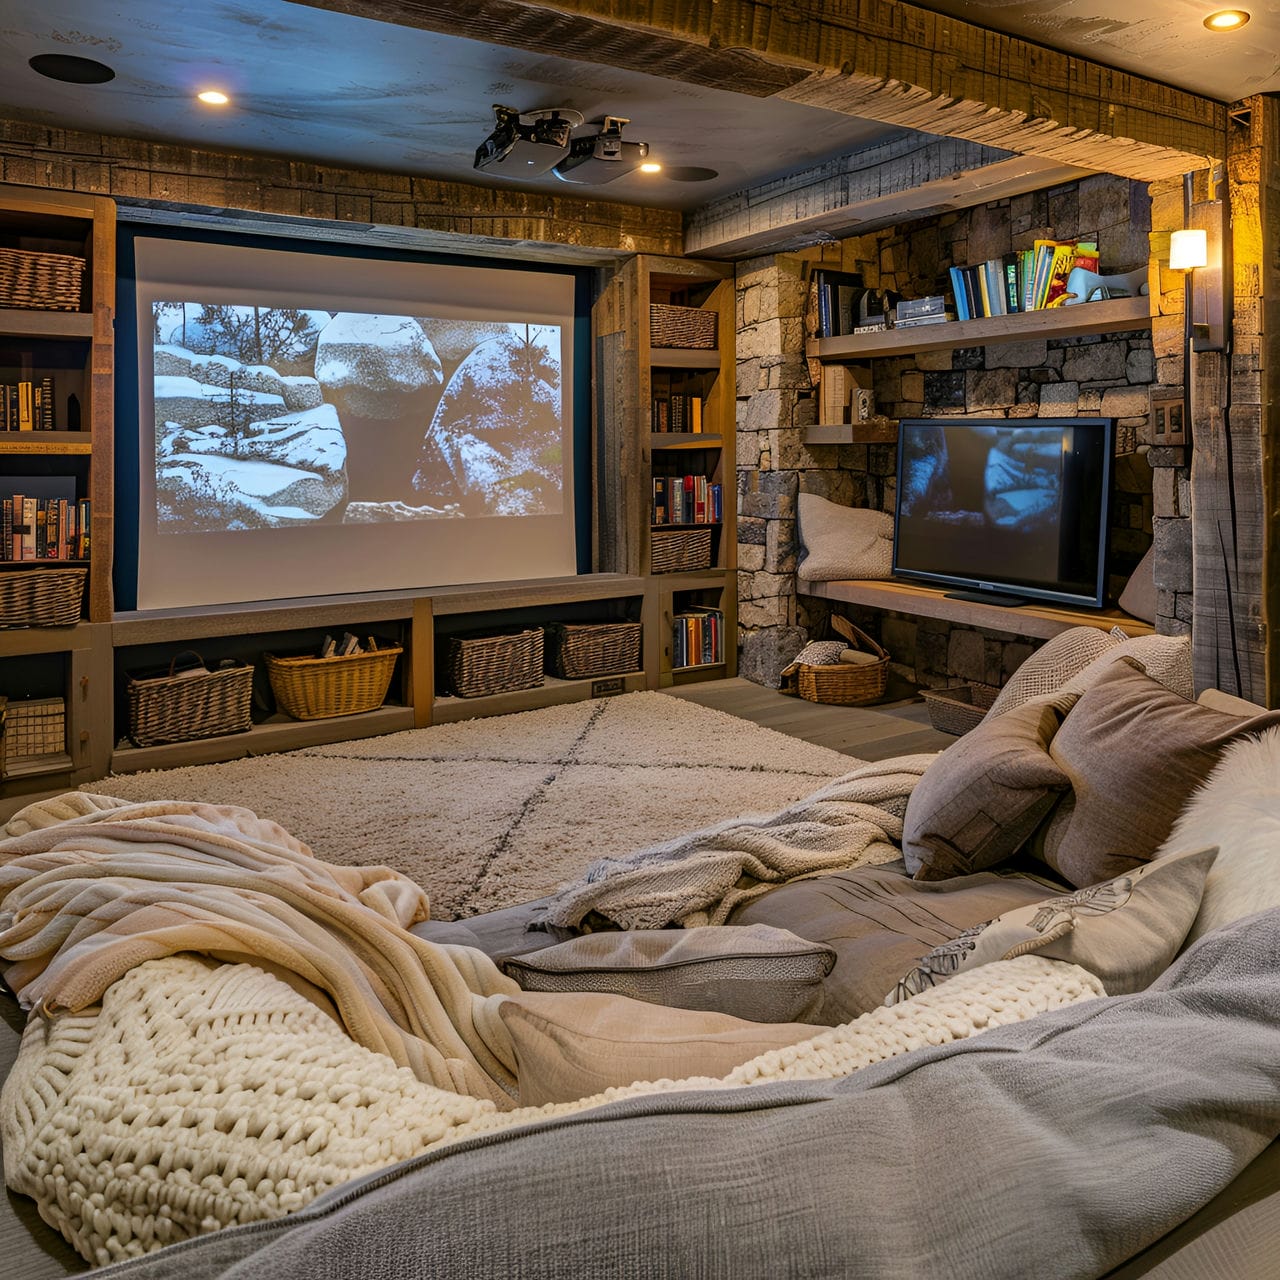 Home theater: size, functionality, uses, furniture and renovation